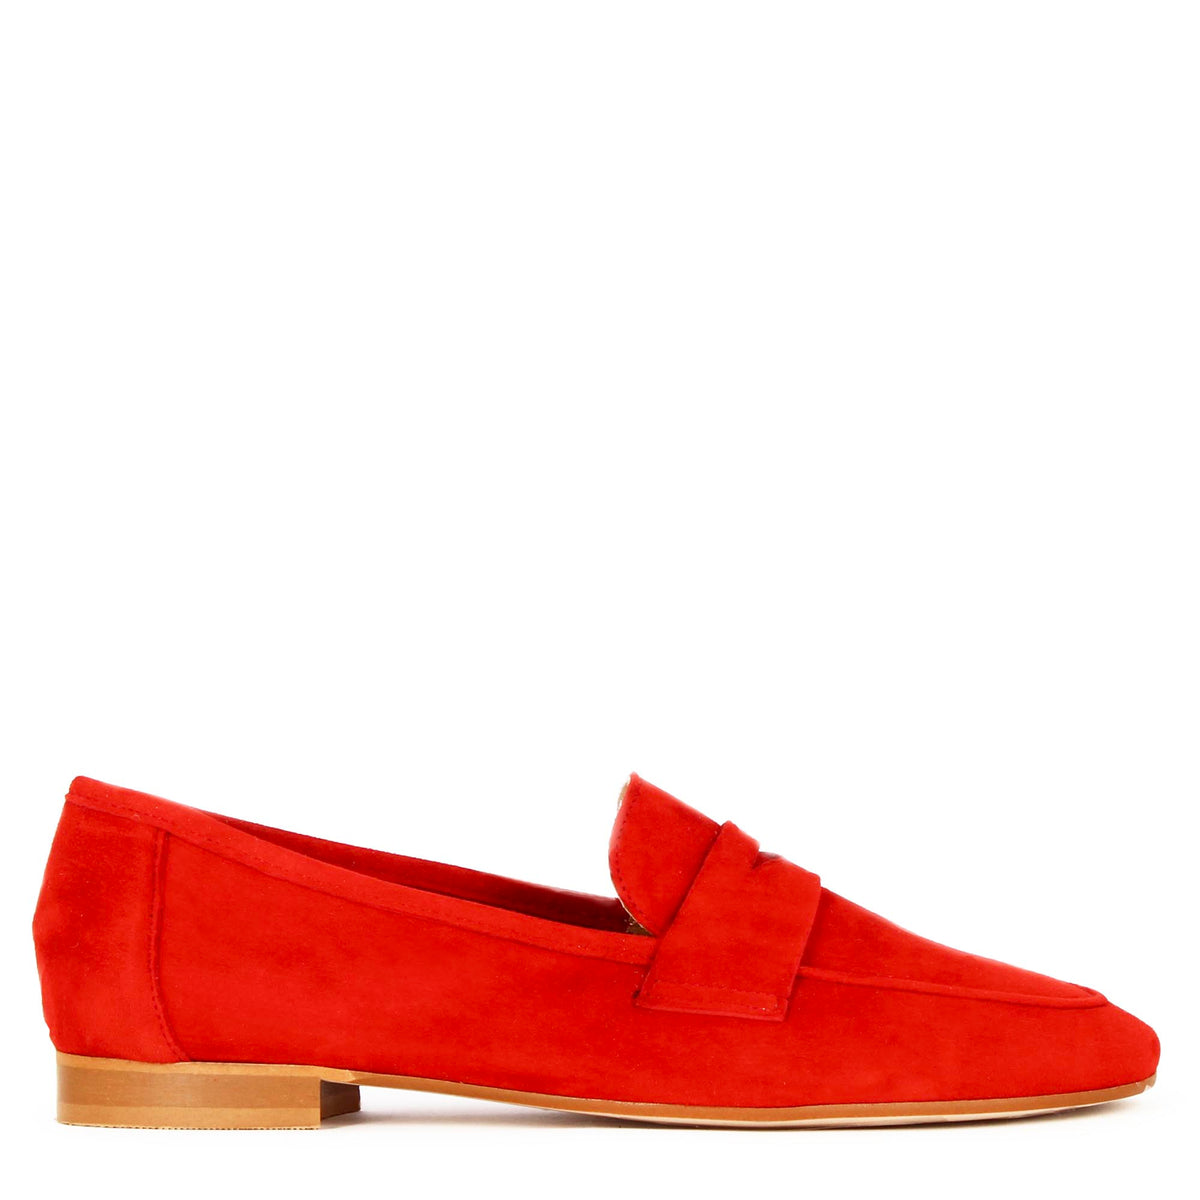 Classic women's moccasin in red suede